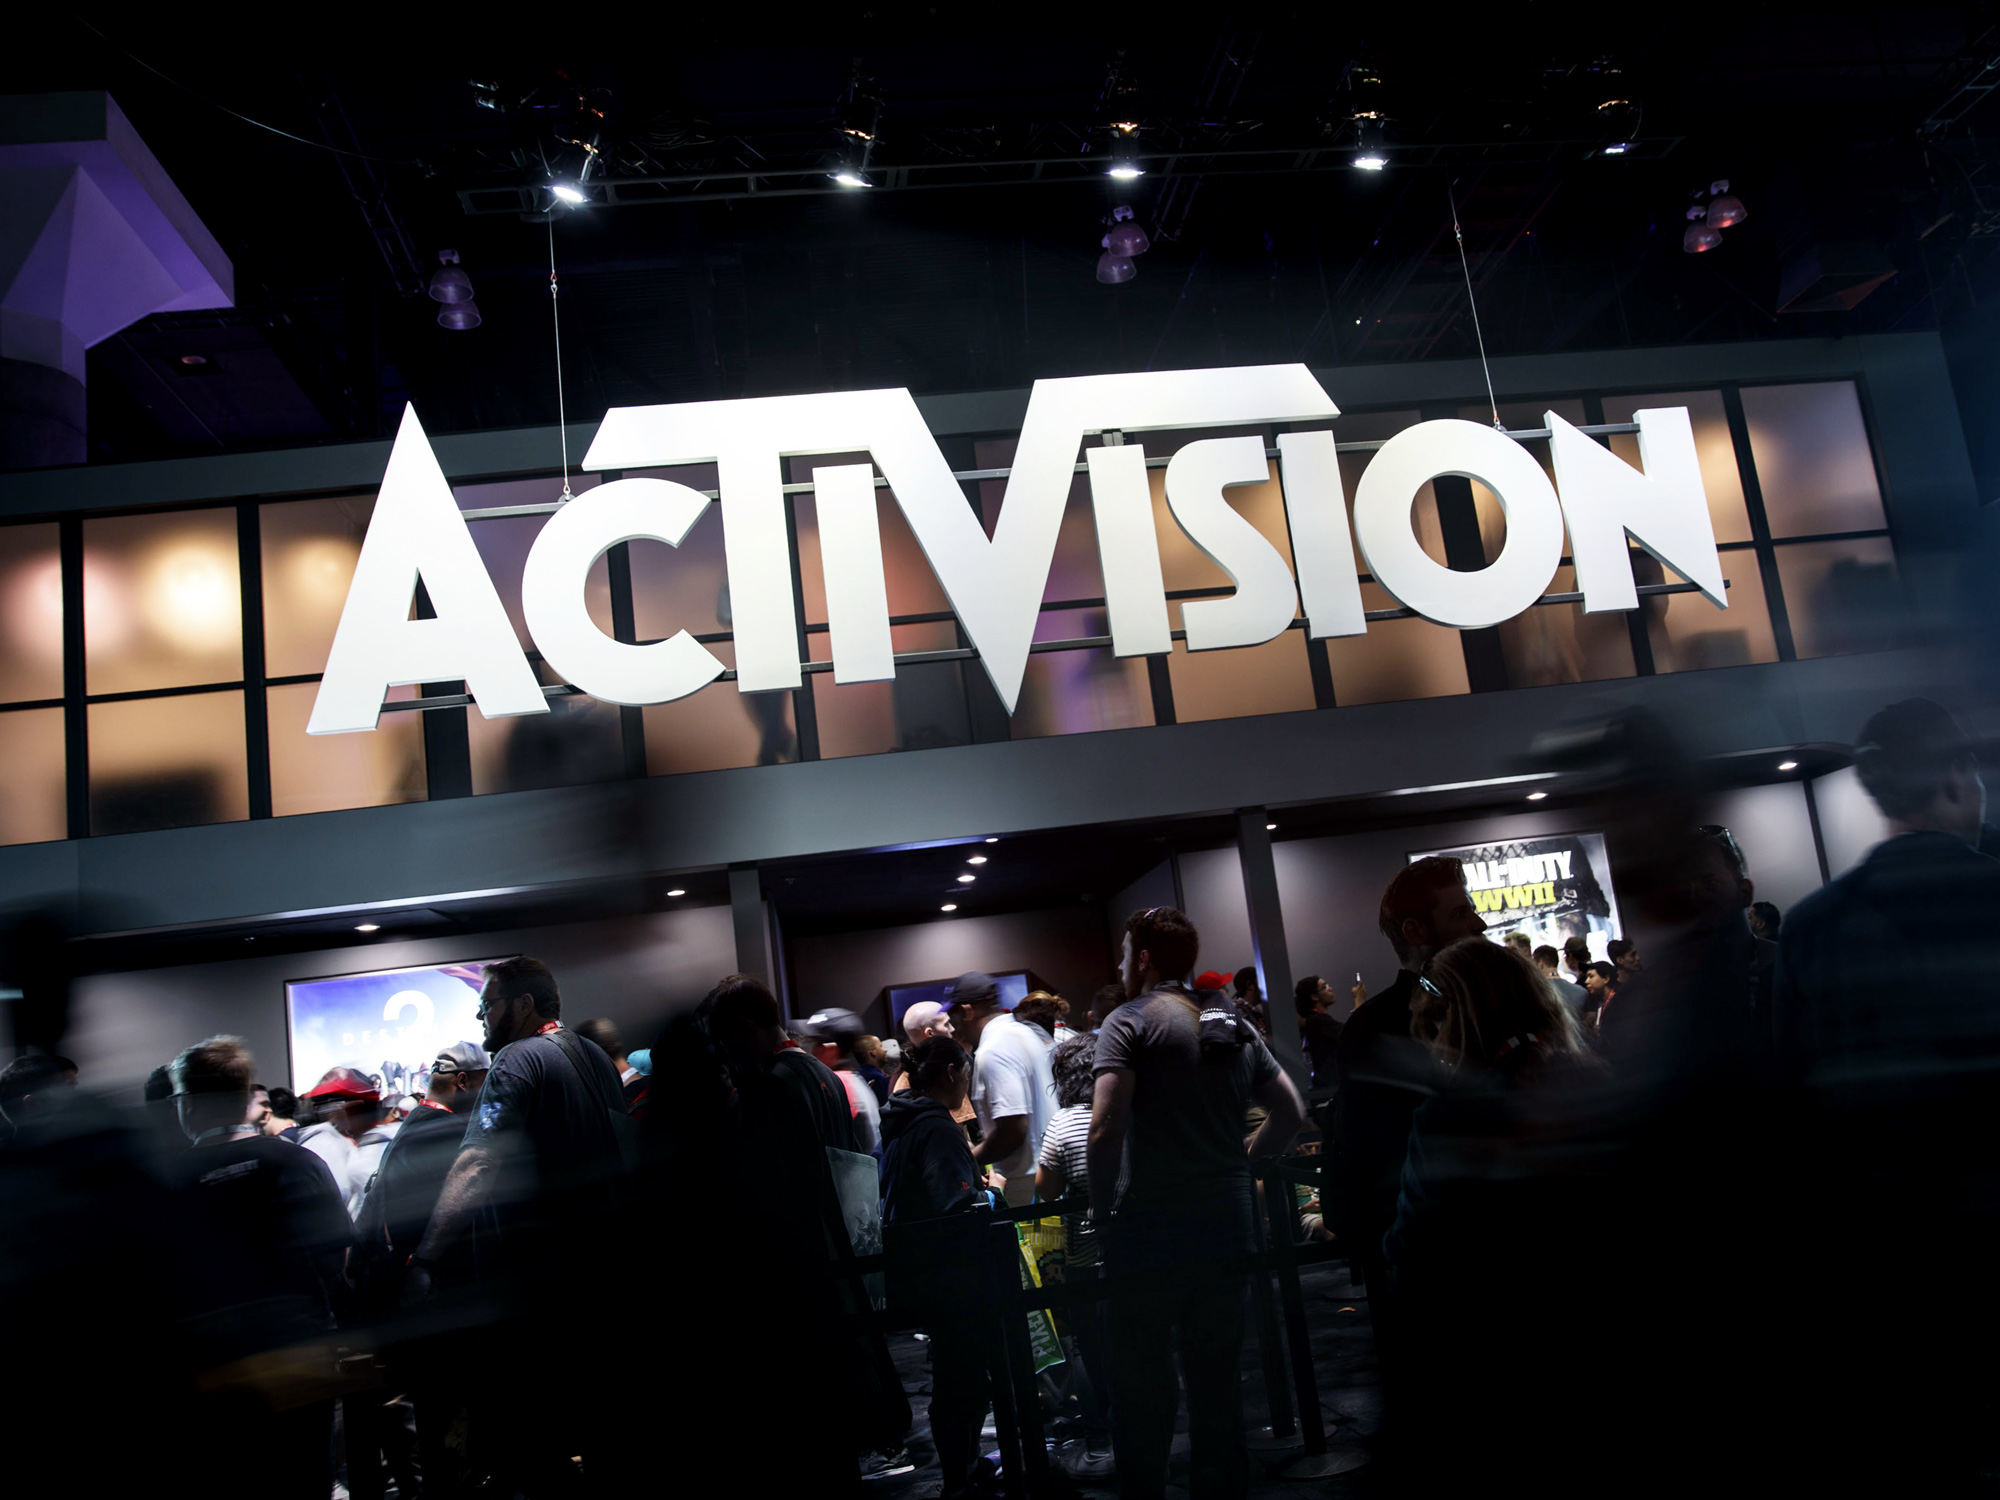 Activision jumped about 6% as the market opened in New York on Friday.